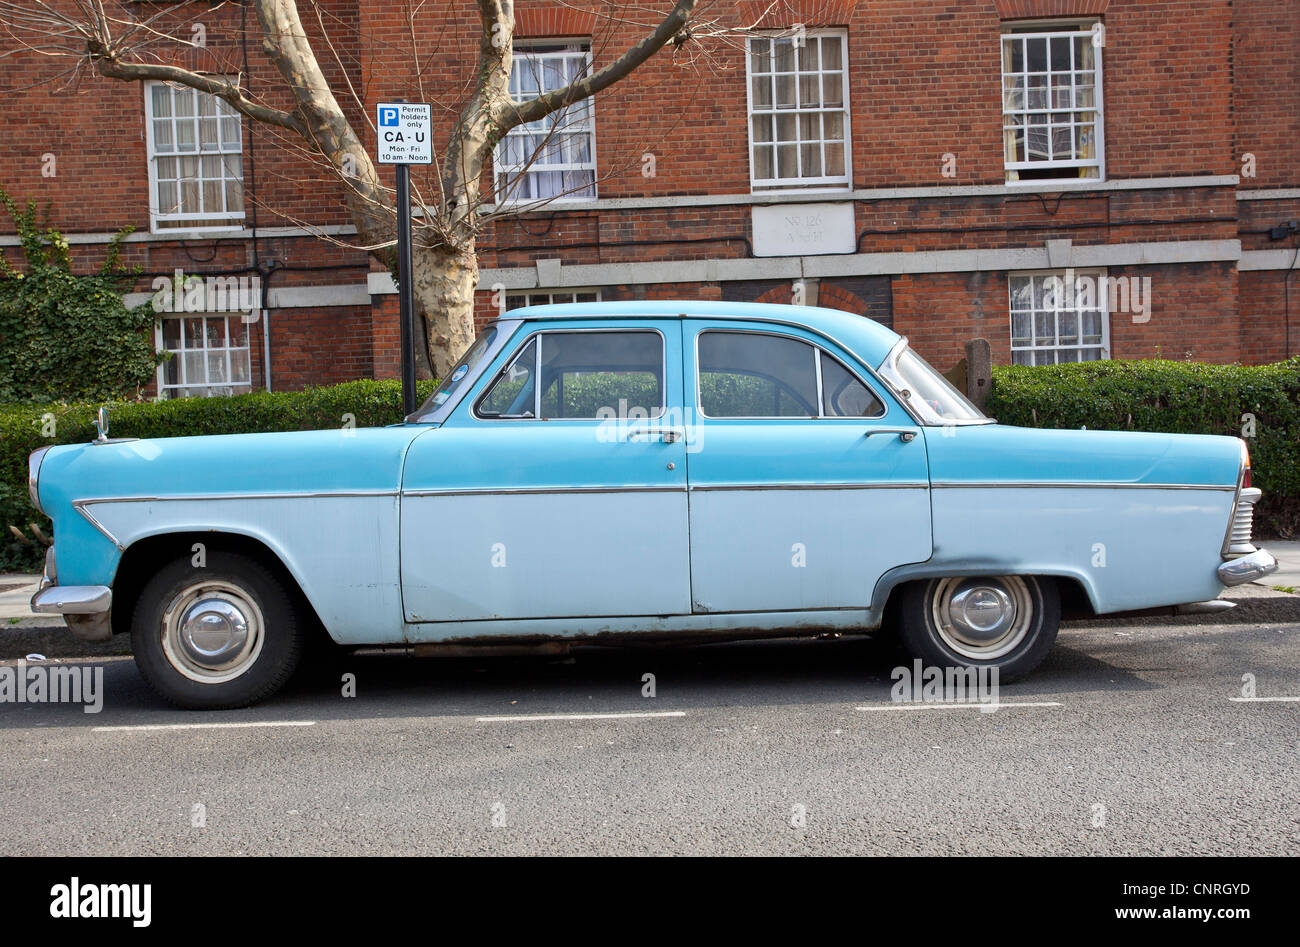 Side view of a Ford Zephyr Zodiac car, parked on the street, London, England, UK Stock Photo